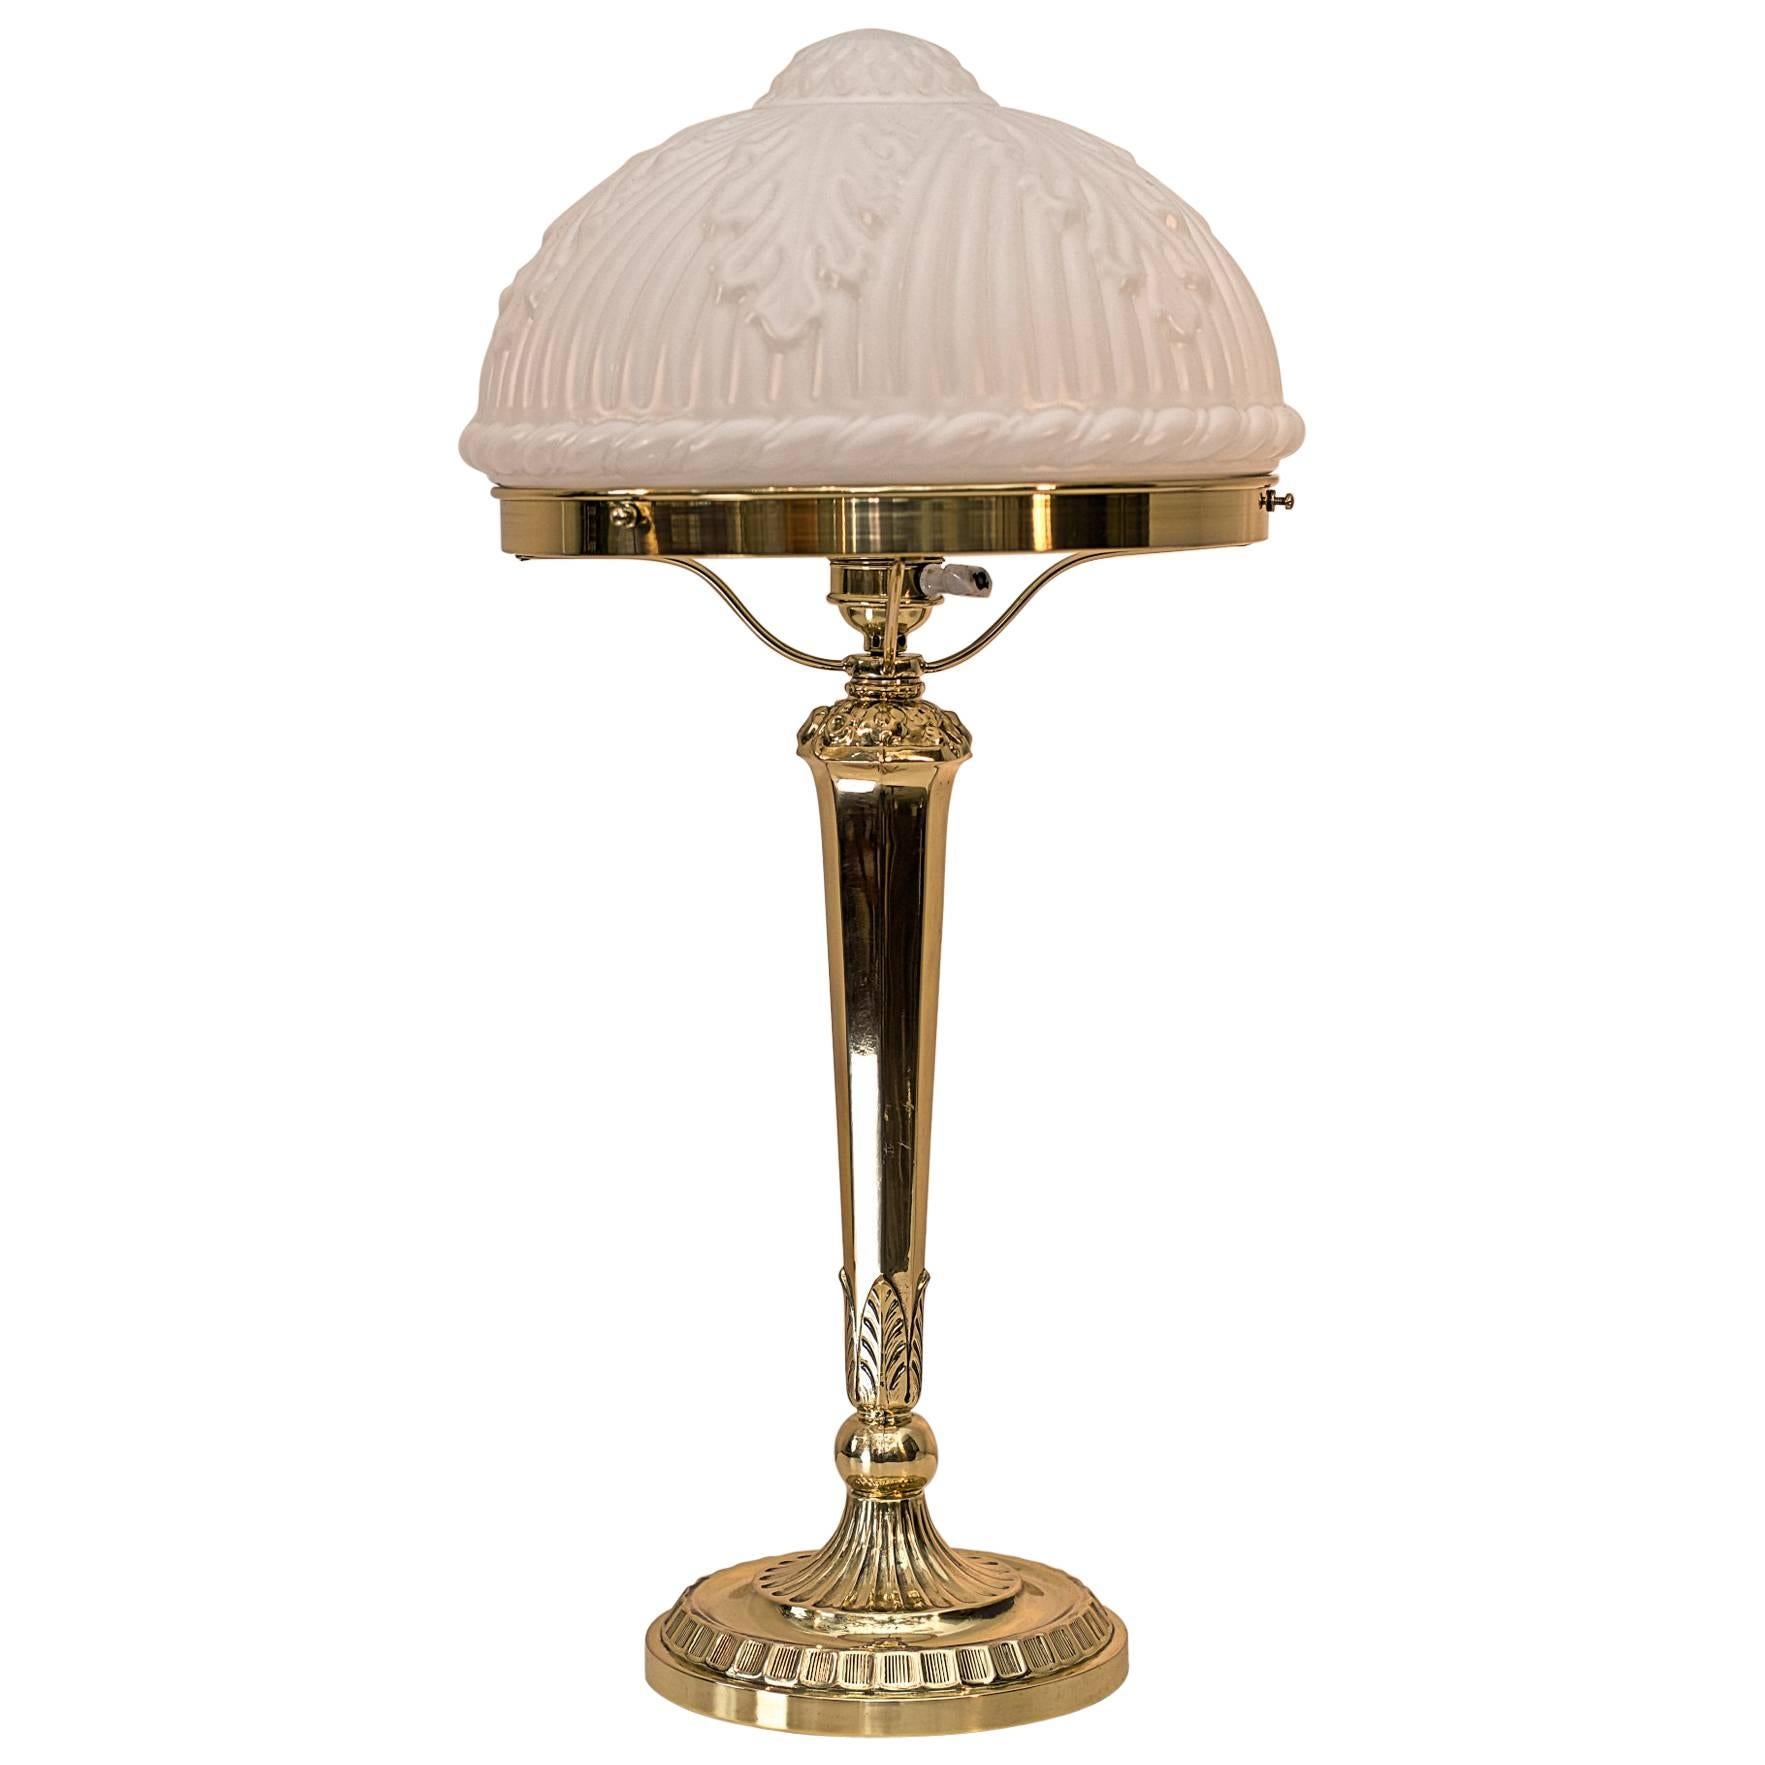 Historistic Table Lamp with Original Glass Shade